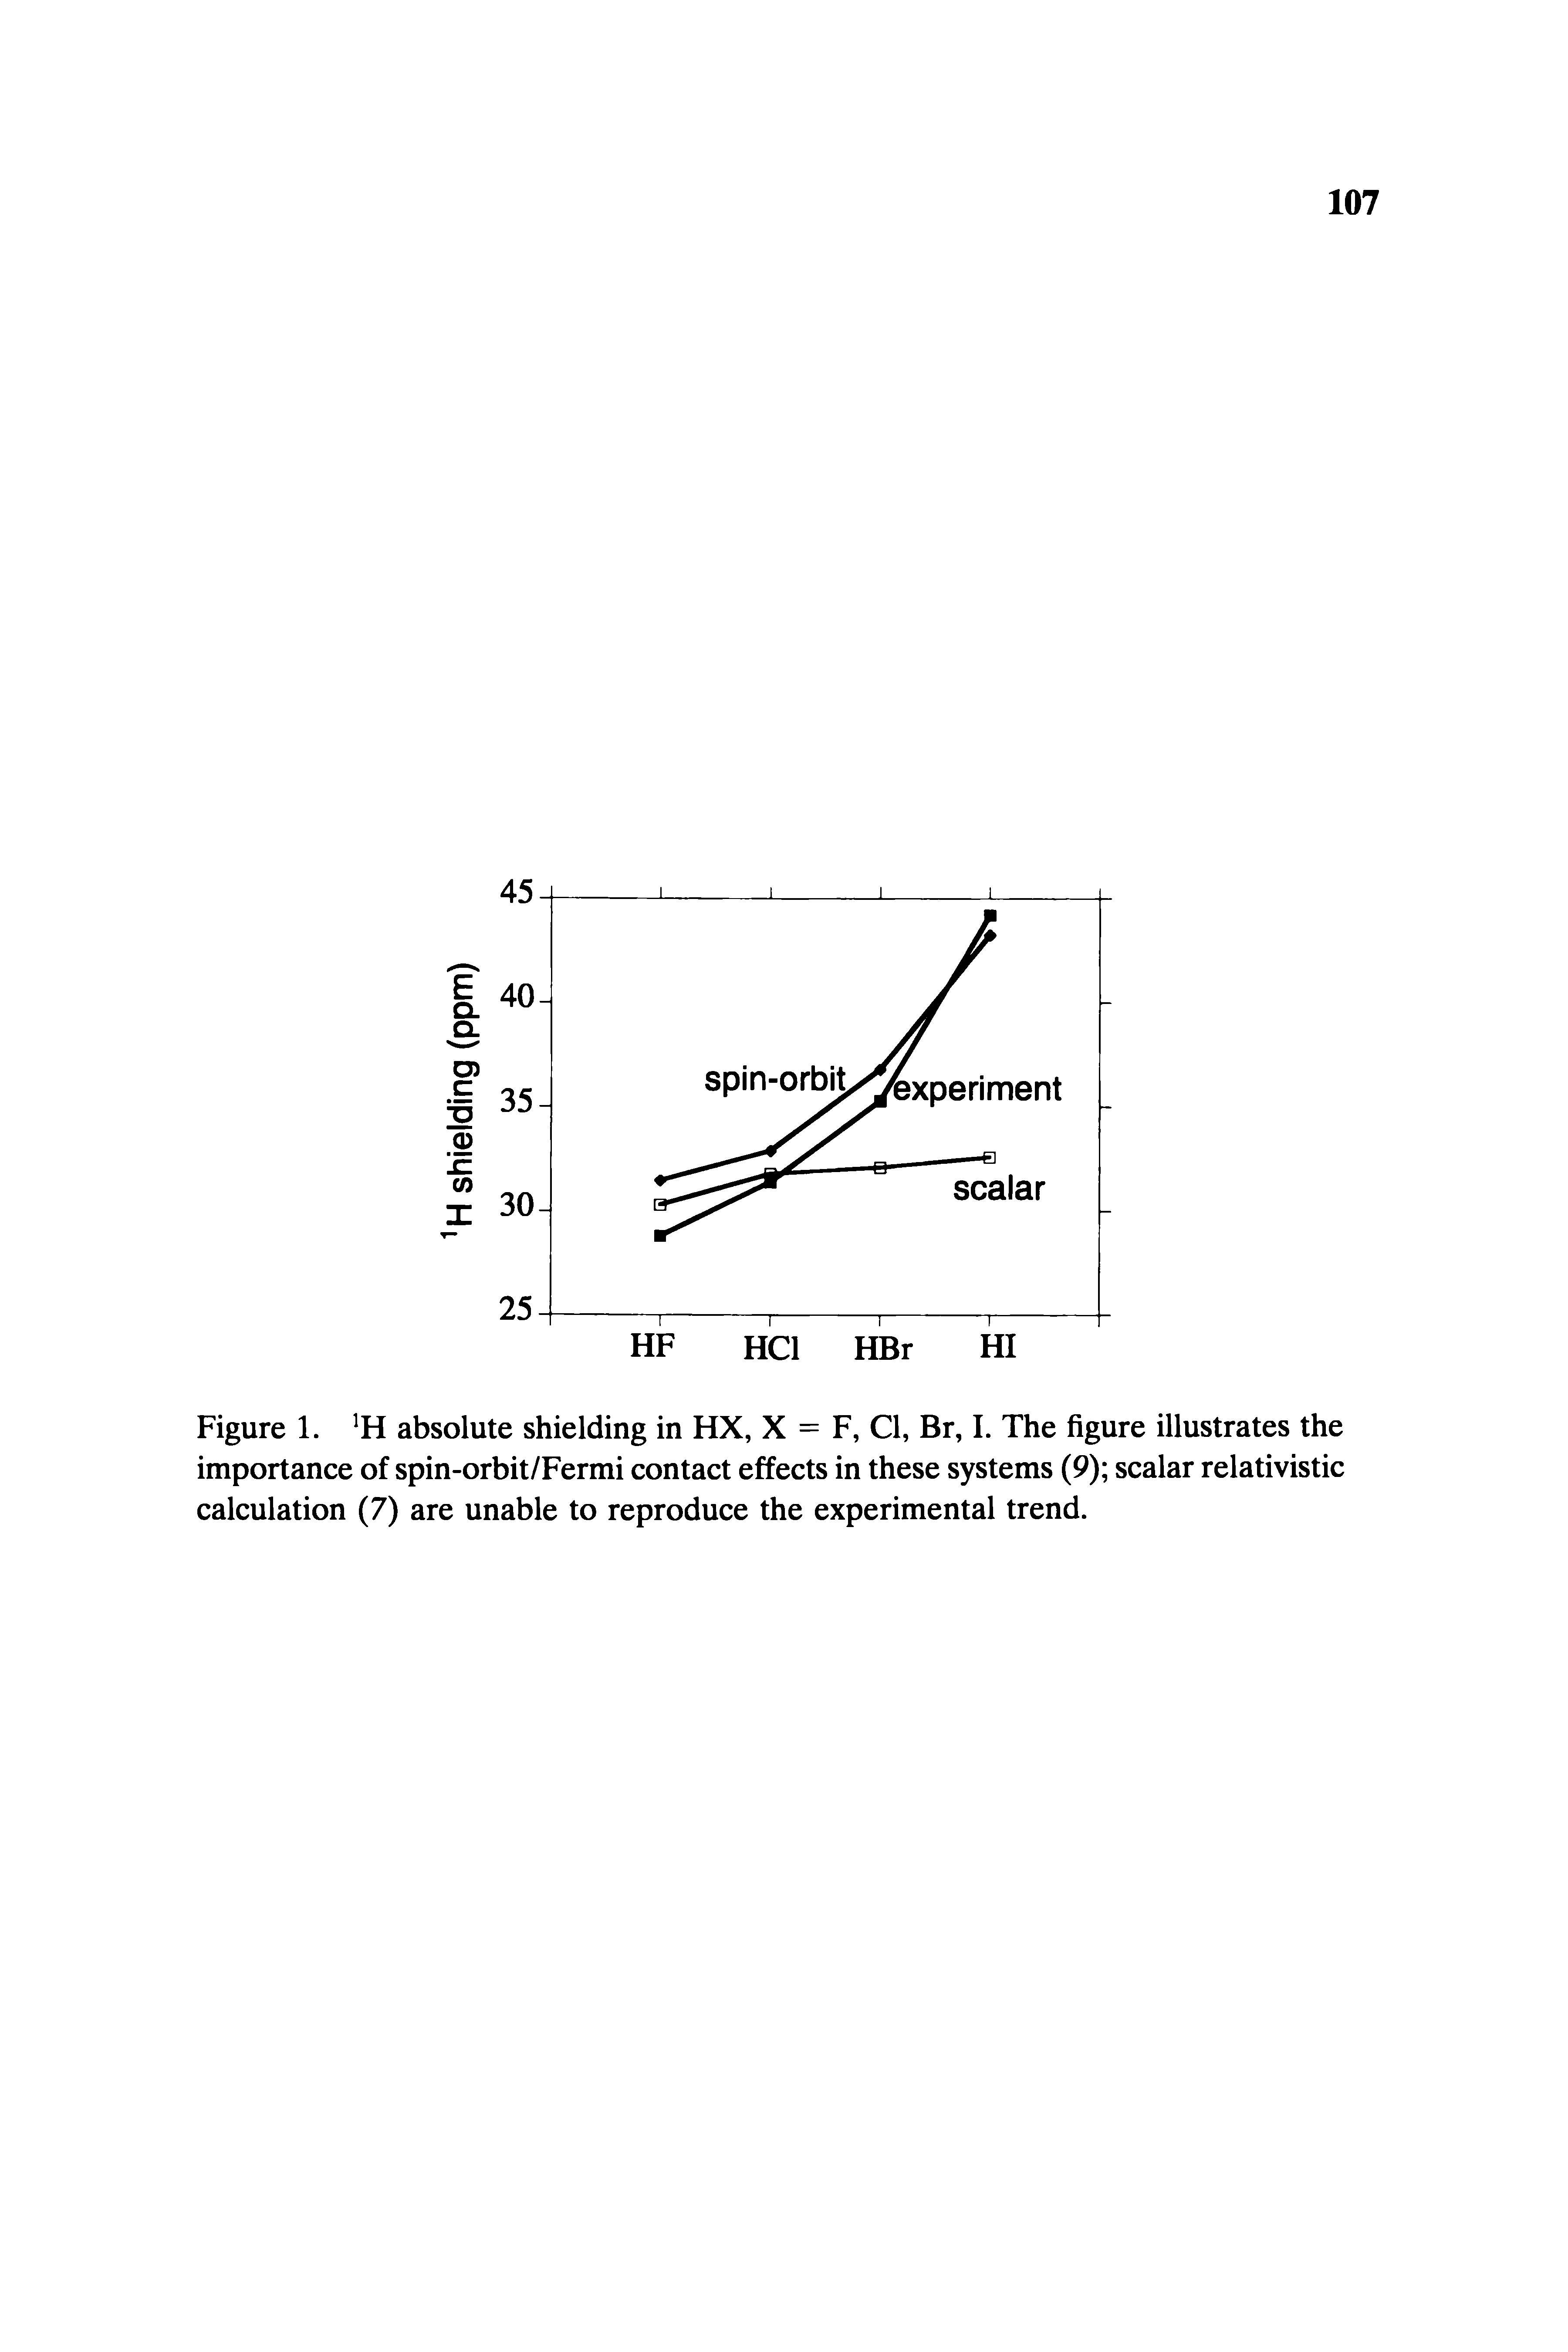 Figure 1. JH absolute shielding in HX, X = F, Cl, Br, I. The figure illustrates the importance of spin-orbit/Fermi contact effects in these systems (9) scalar relativistic calculation (7) are unable to reproduce the experimental trend.